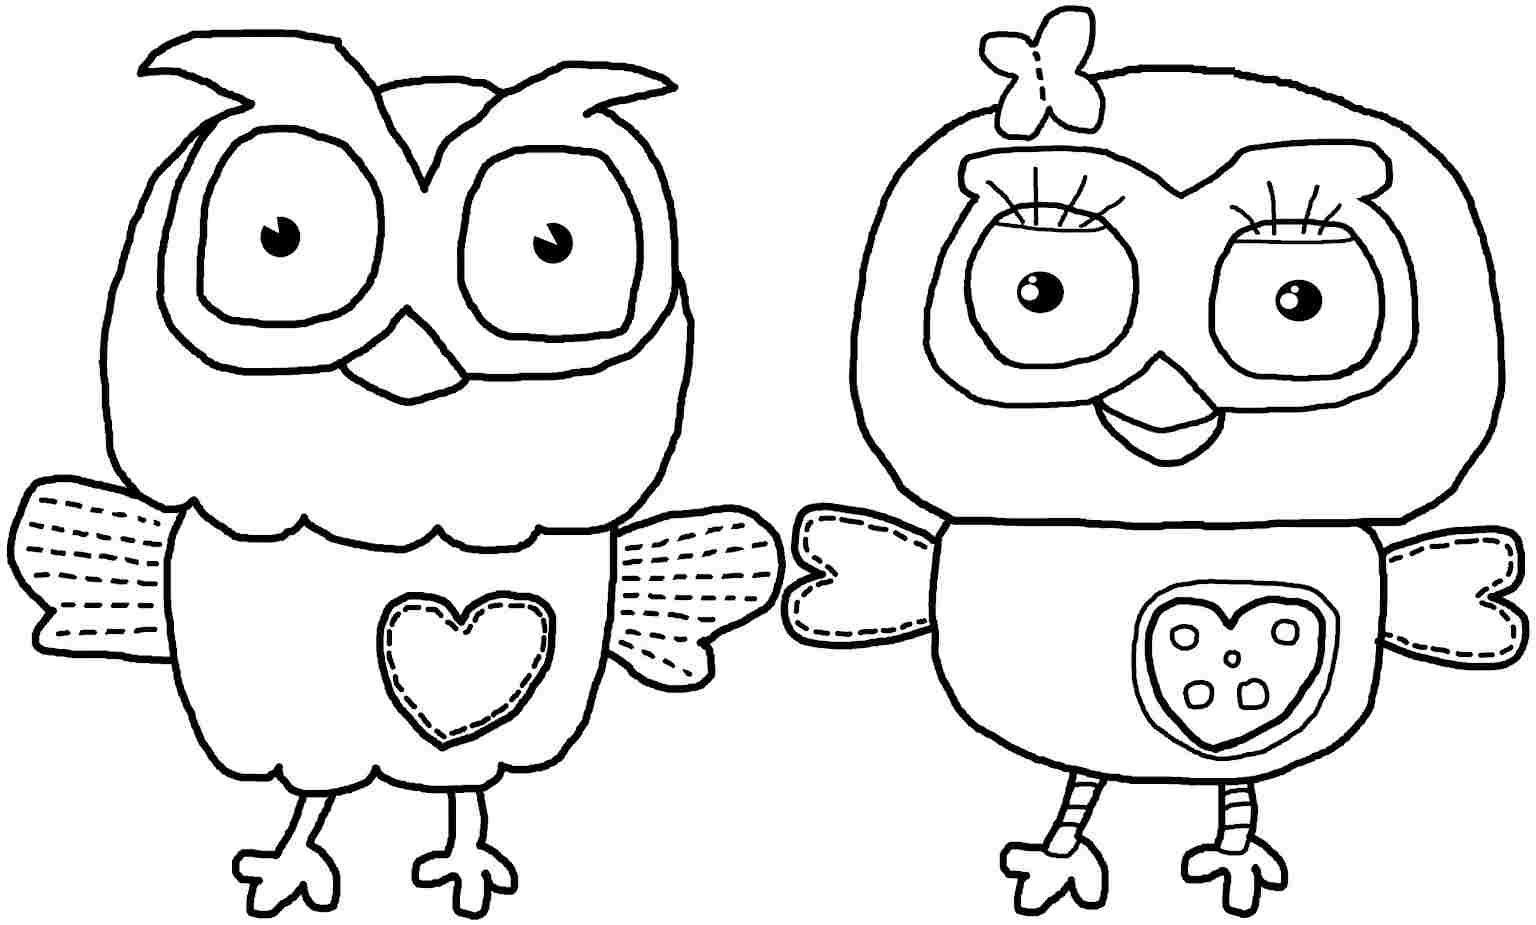 10 Up For Owl Coloring Pages - Coloring Pages For All Ages